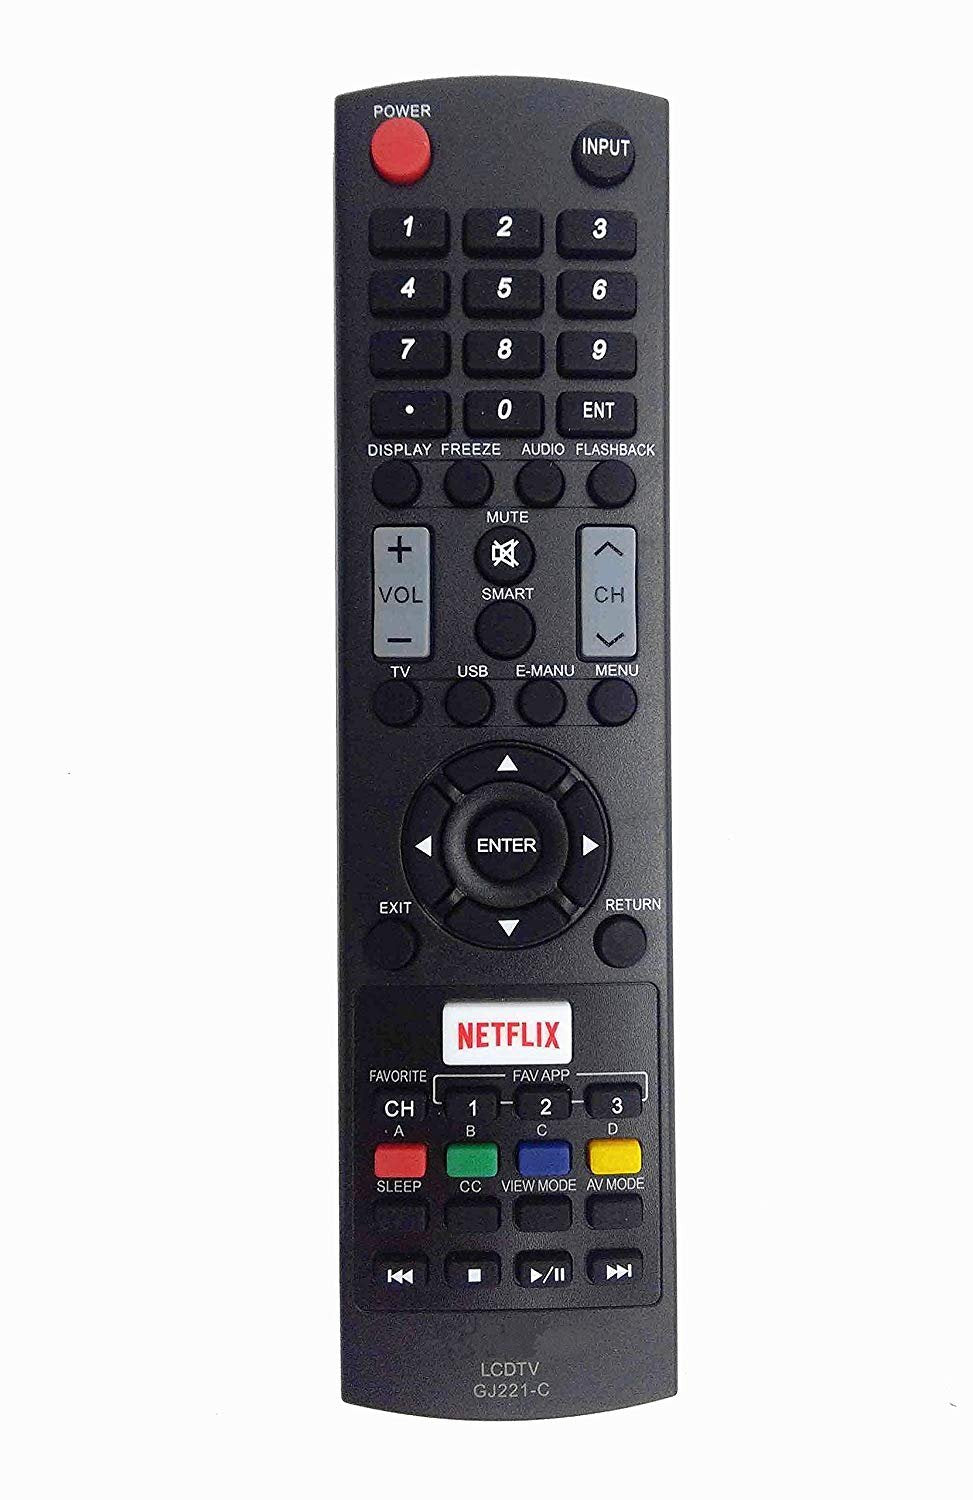 New GJ221-C Remote Control Replacement for Sharp AQUOS TV 32LE653U 40LE653U LC-32LE653U LC-40LE653U LC-43LE653U LC-48LE551U LC-48LE653U LC-55LE653U LC-65LE645U LC-65LE653U LC-65LE654U